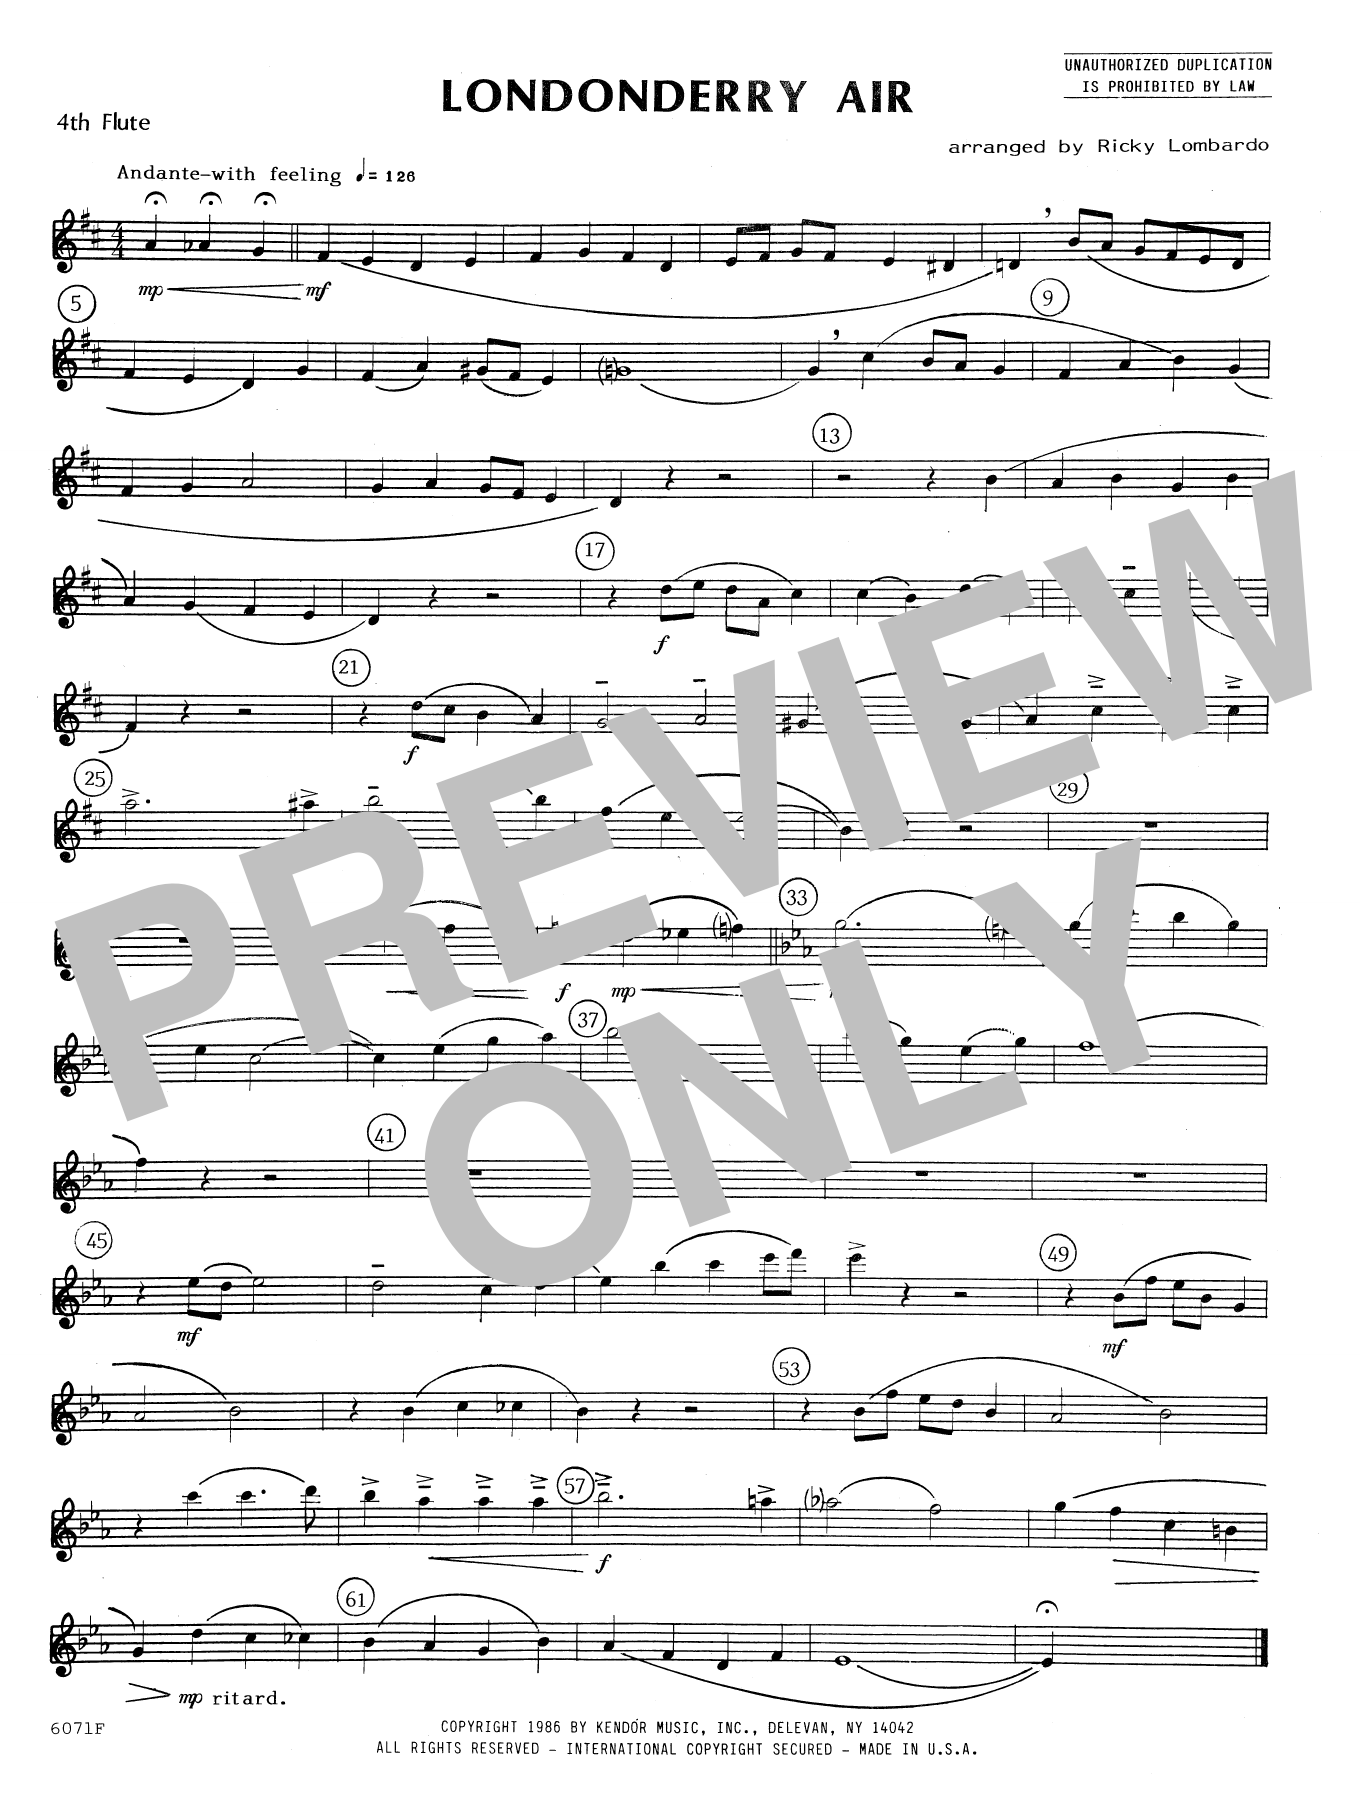 Download Lombardo Londonderry Air - 4th Flute Sheet Music